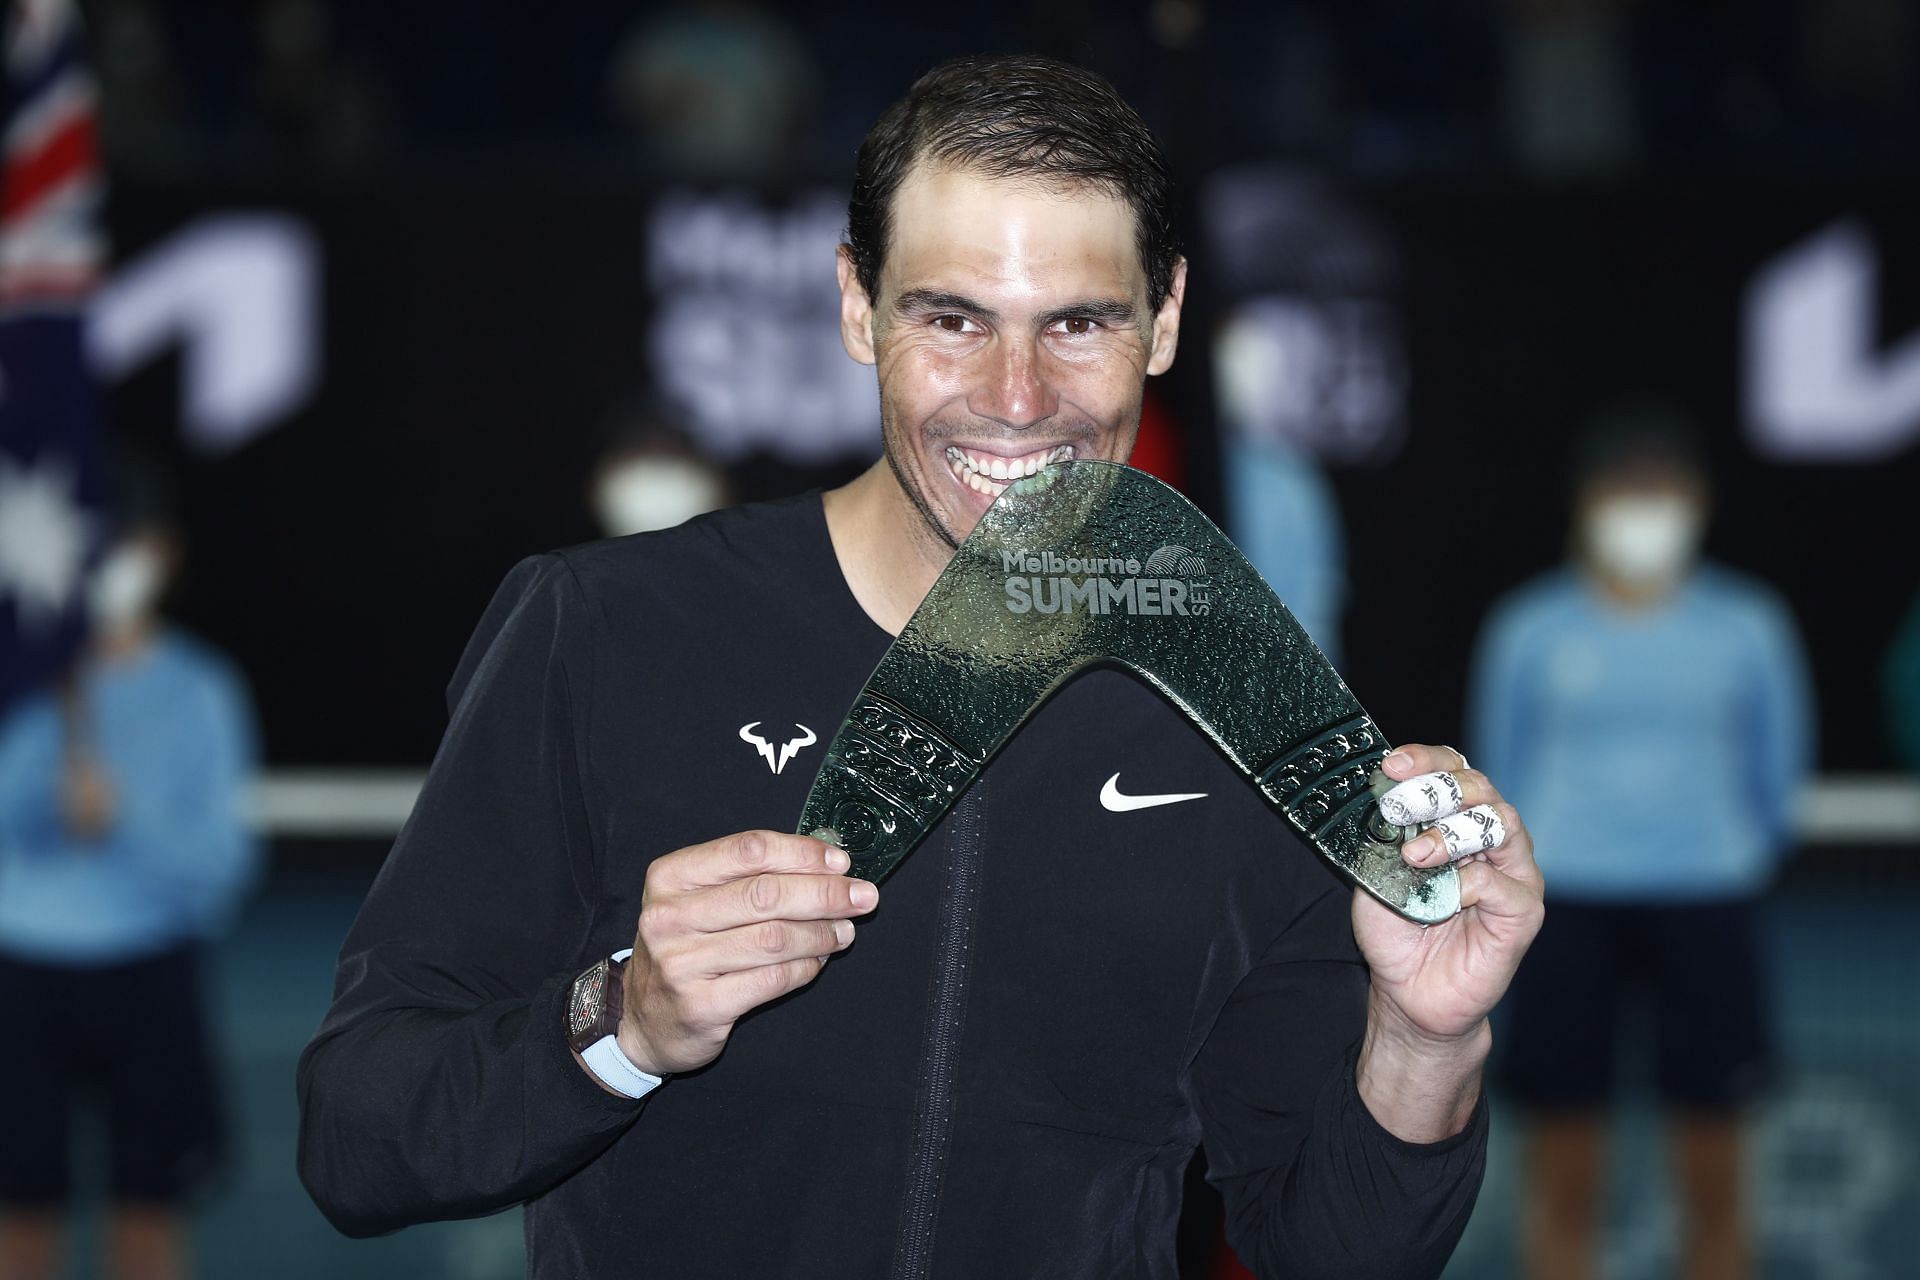 Rafael Nadal with his 2022 Melbourn Summer Set trophy